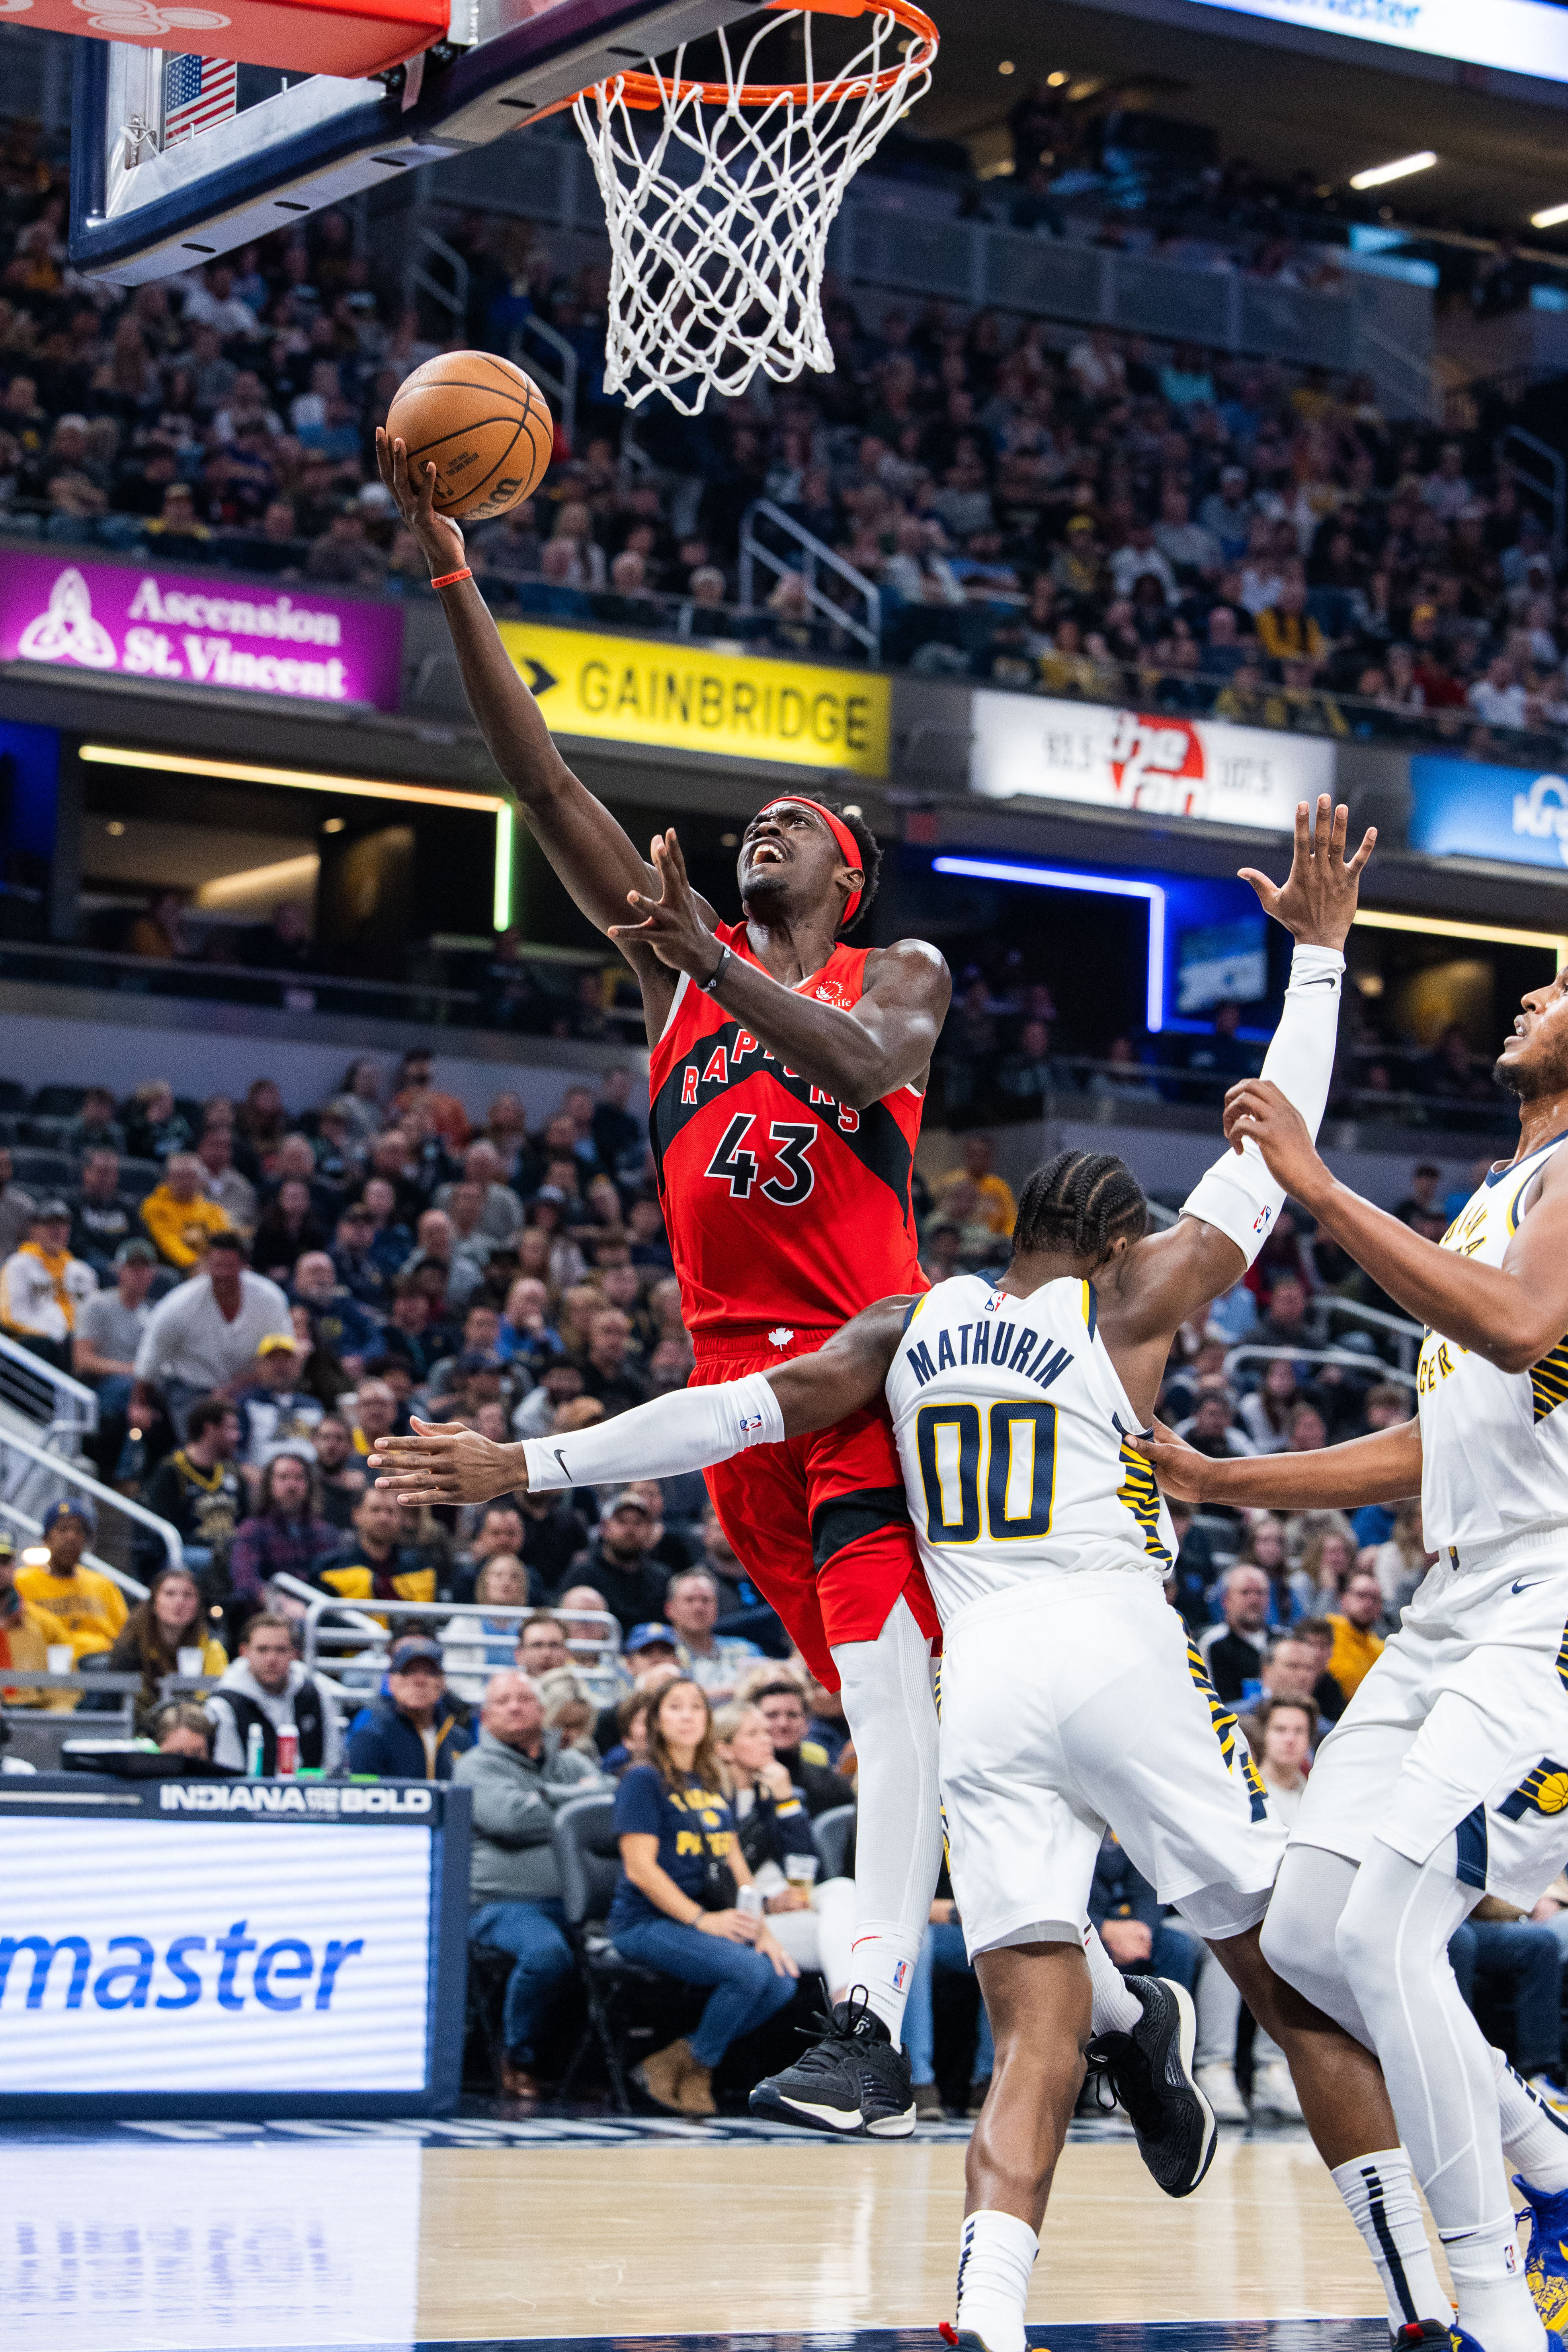 NBA on TNT on X: The new-look Pacers 👀 The Indiana Pacers are acquiring  Pascal Siakam from the Toronto Raptors, per @wojespn   / X